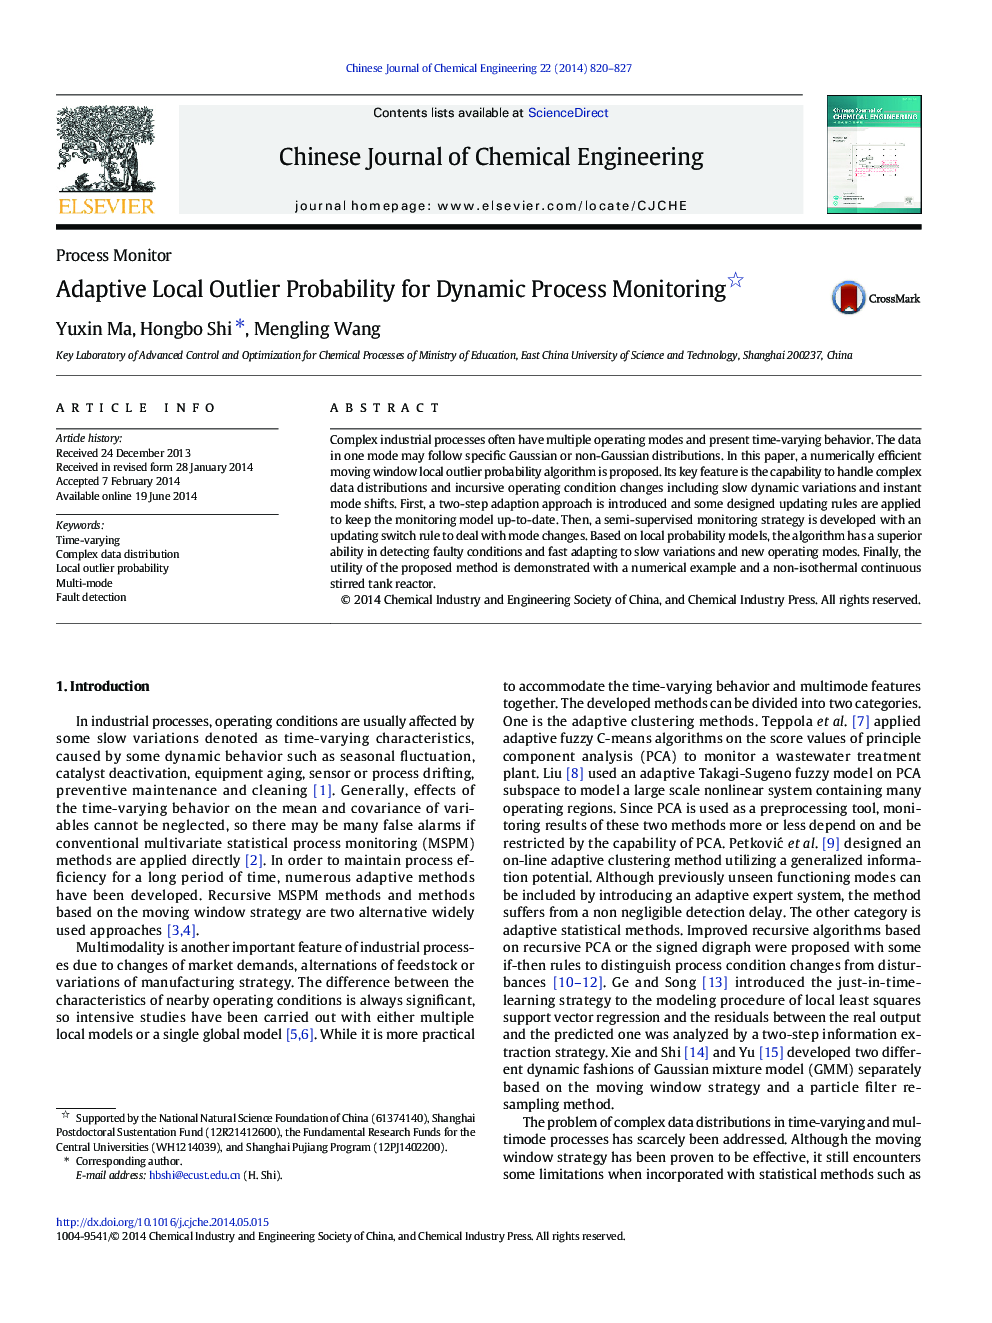 Adaptive Local Outlier Probability for Dynamic Process Monitoring 